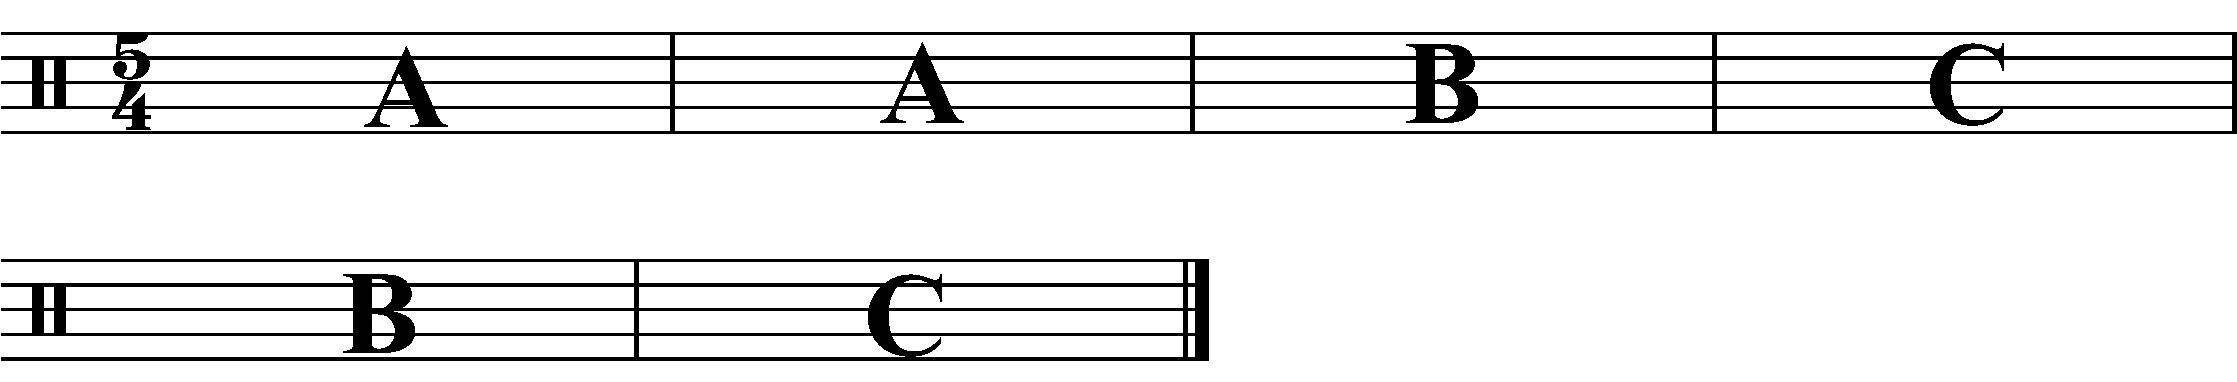 A six bar phrase using three structural sections.